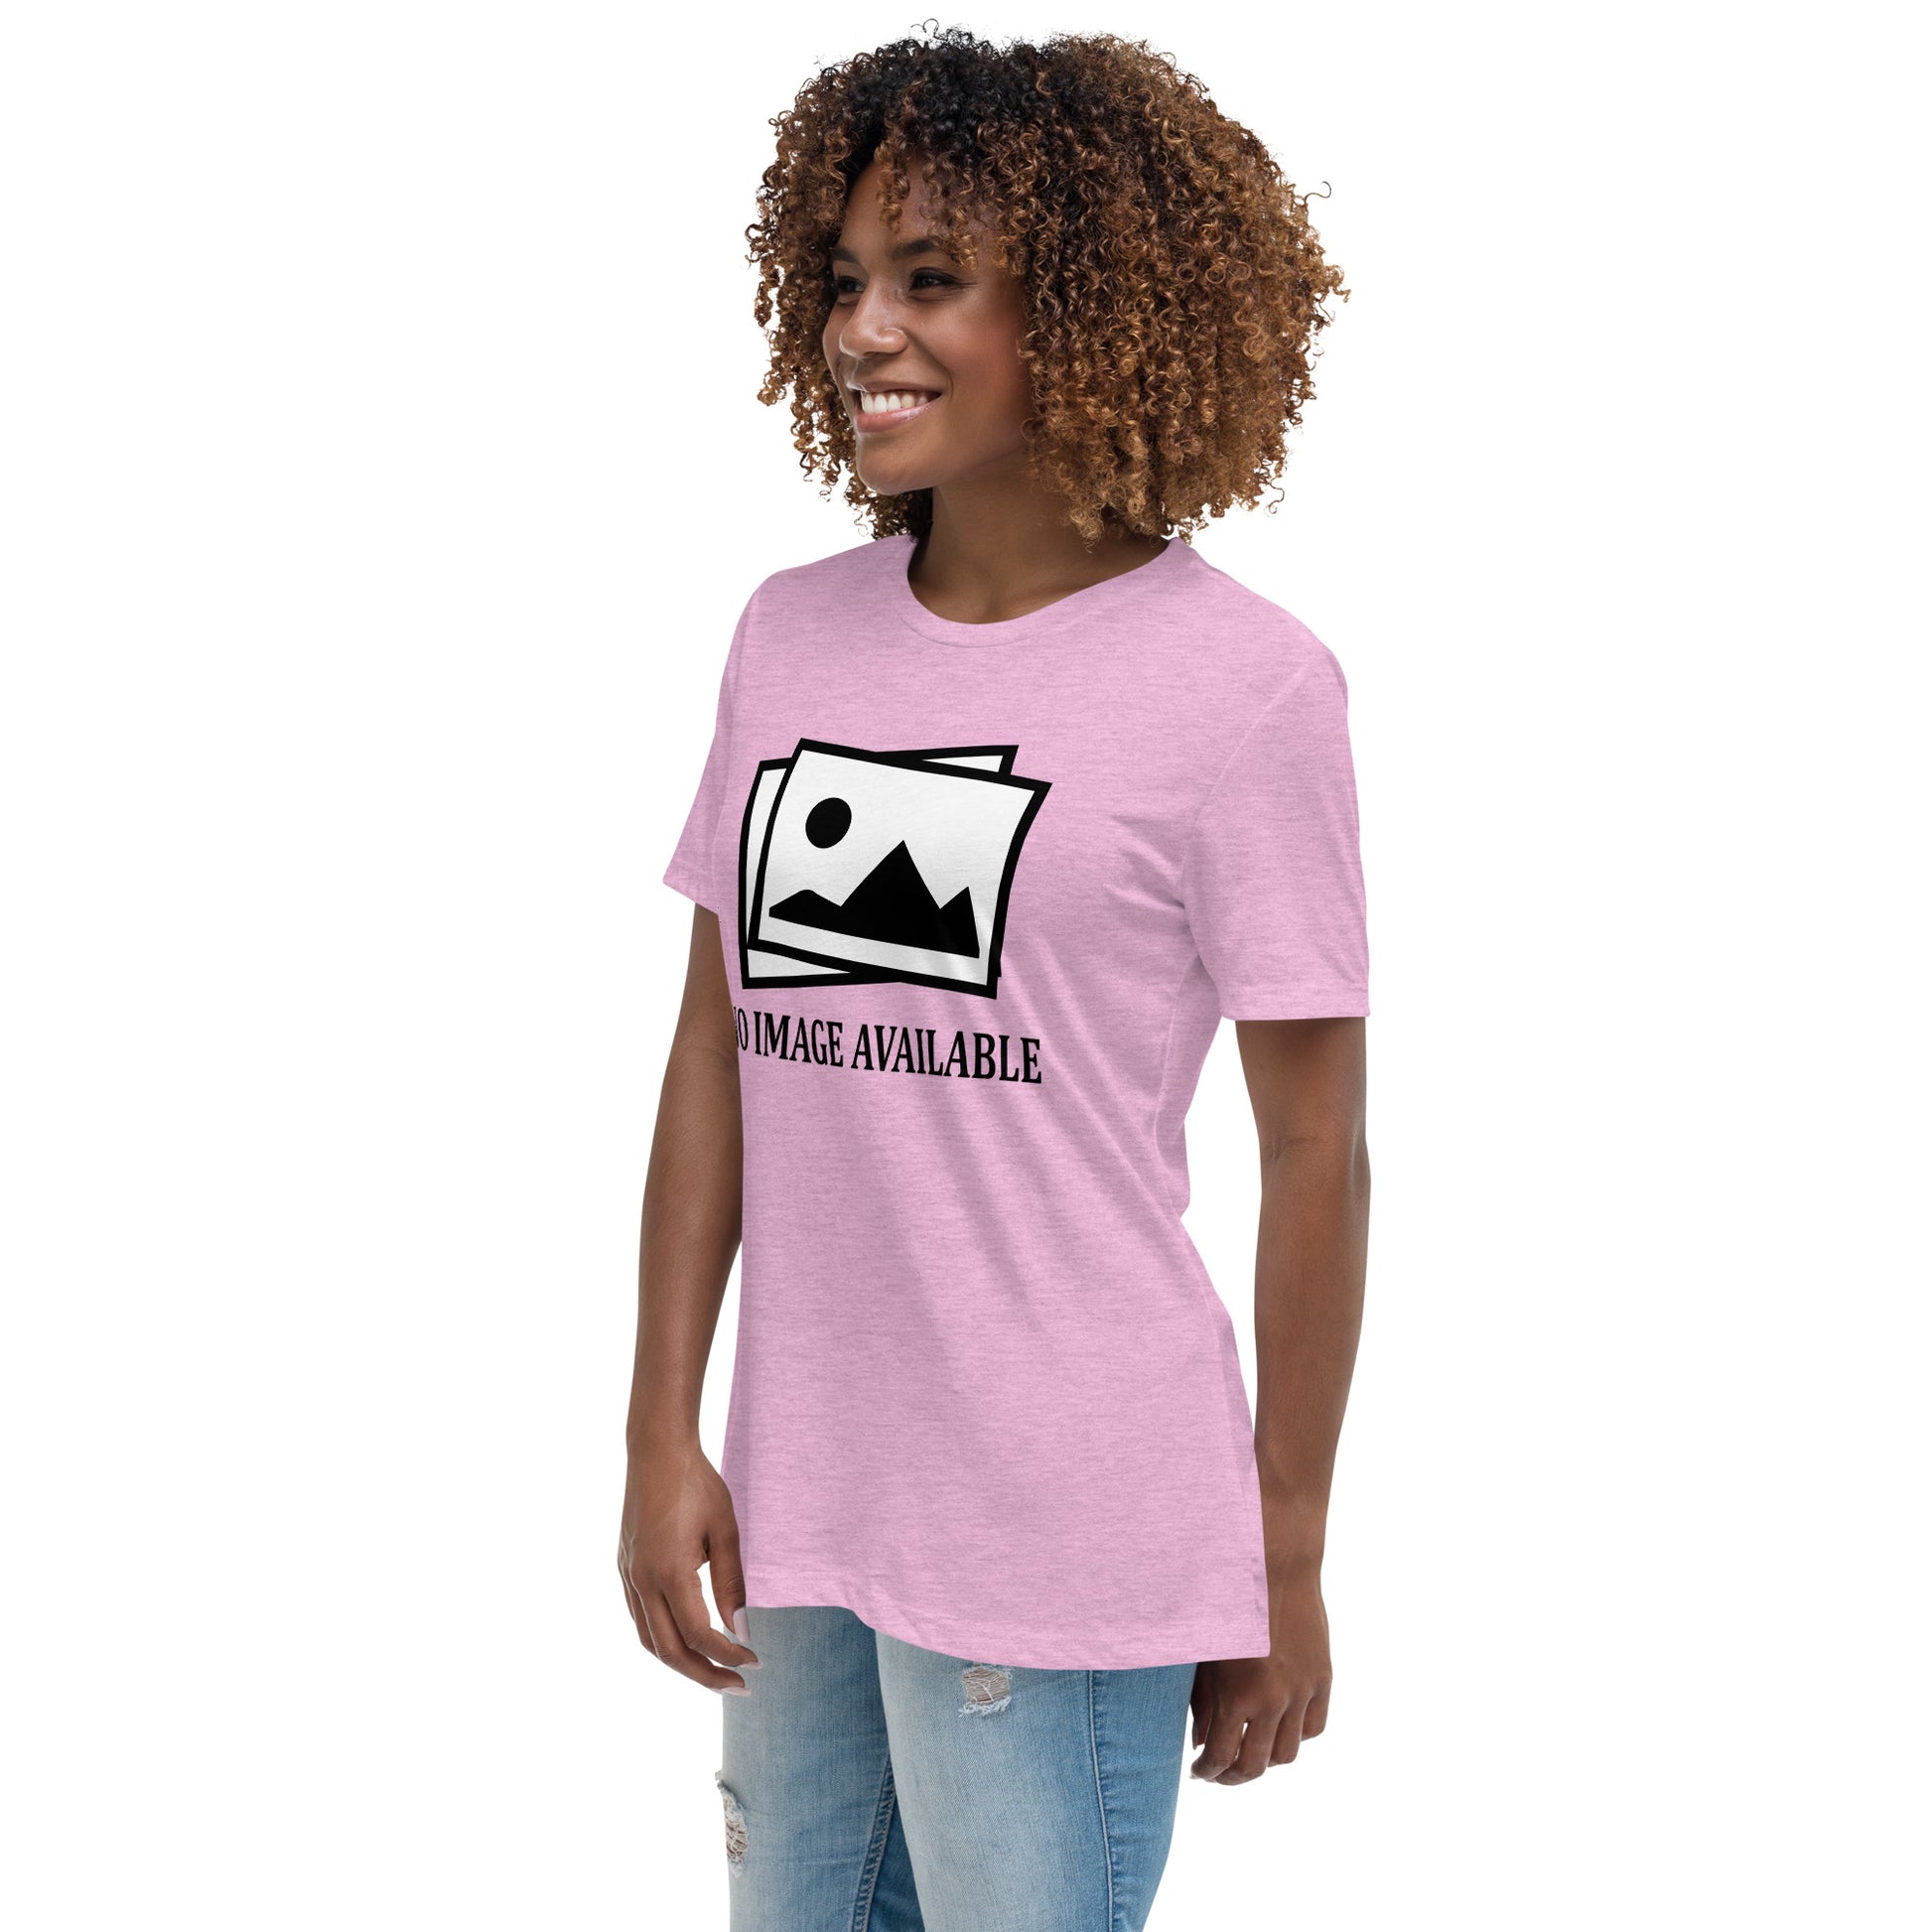 Women with lilac t-shirt with image and text "no image available"